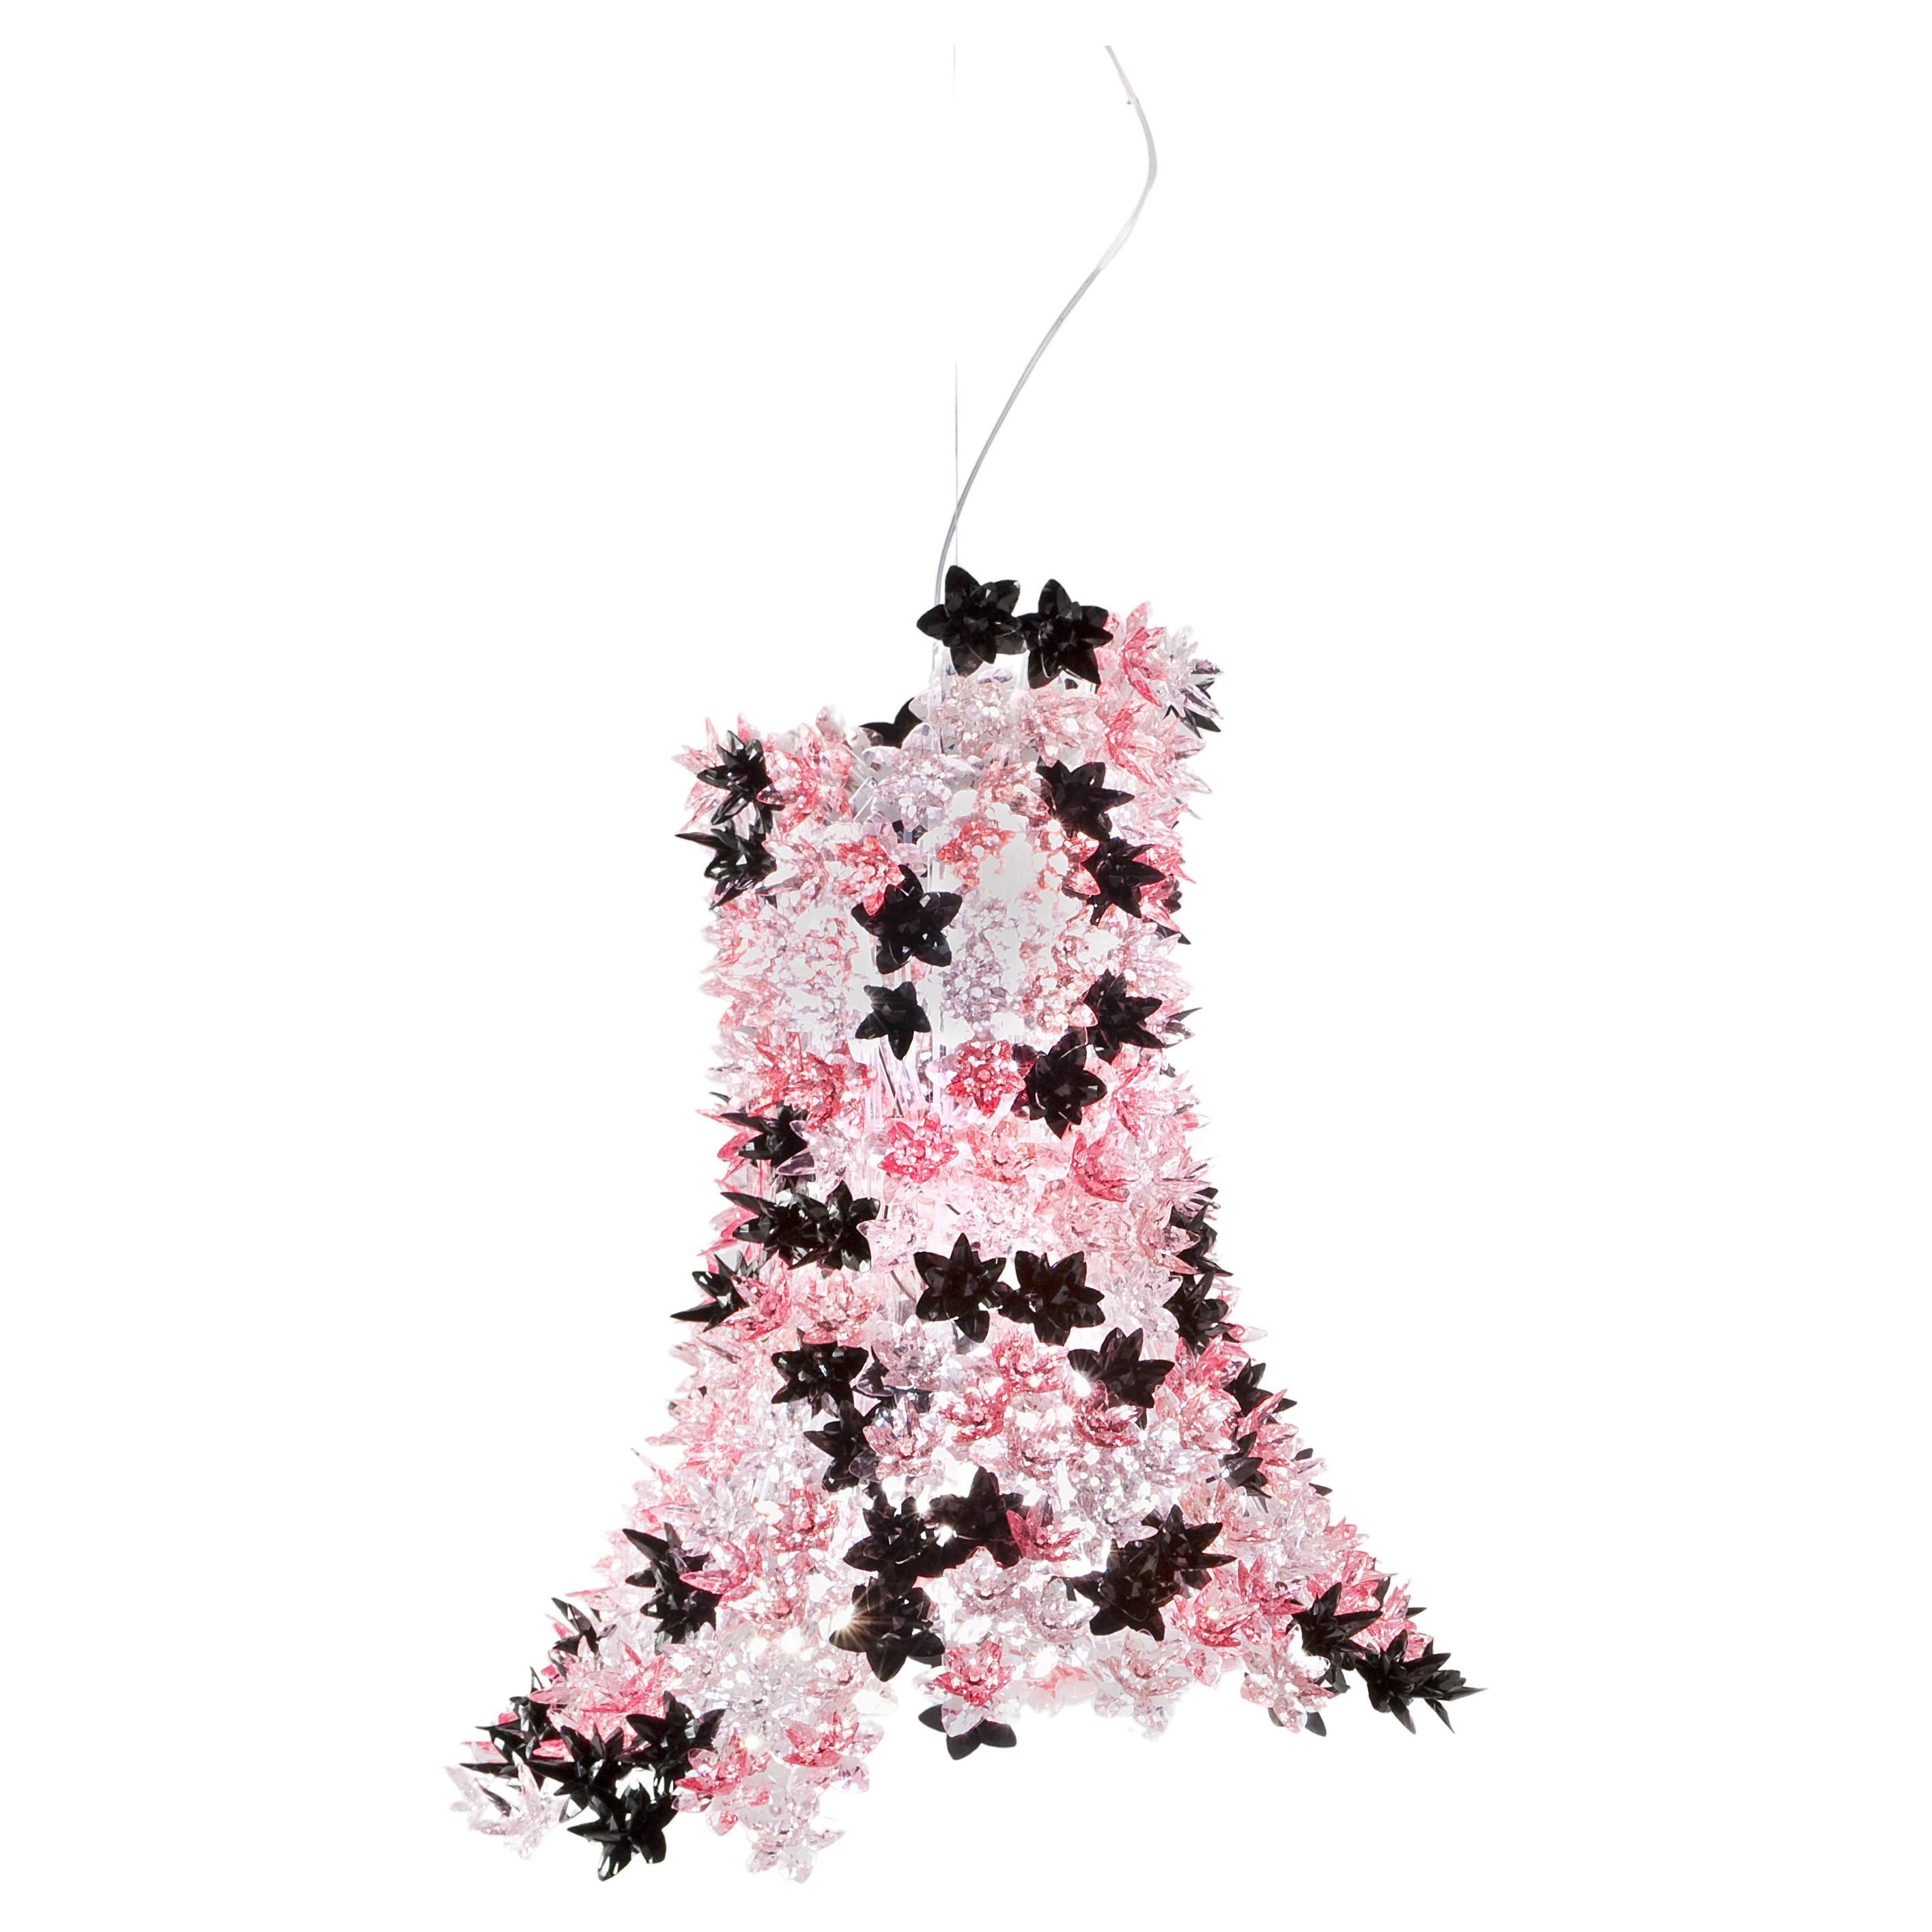 Kartell Bloom Suspension in Pink & Black by Ferruccio Laviani For Sale